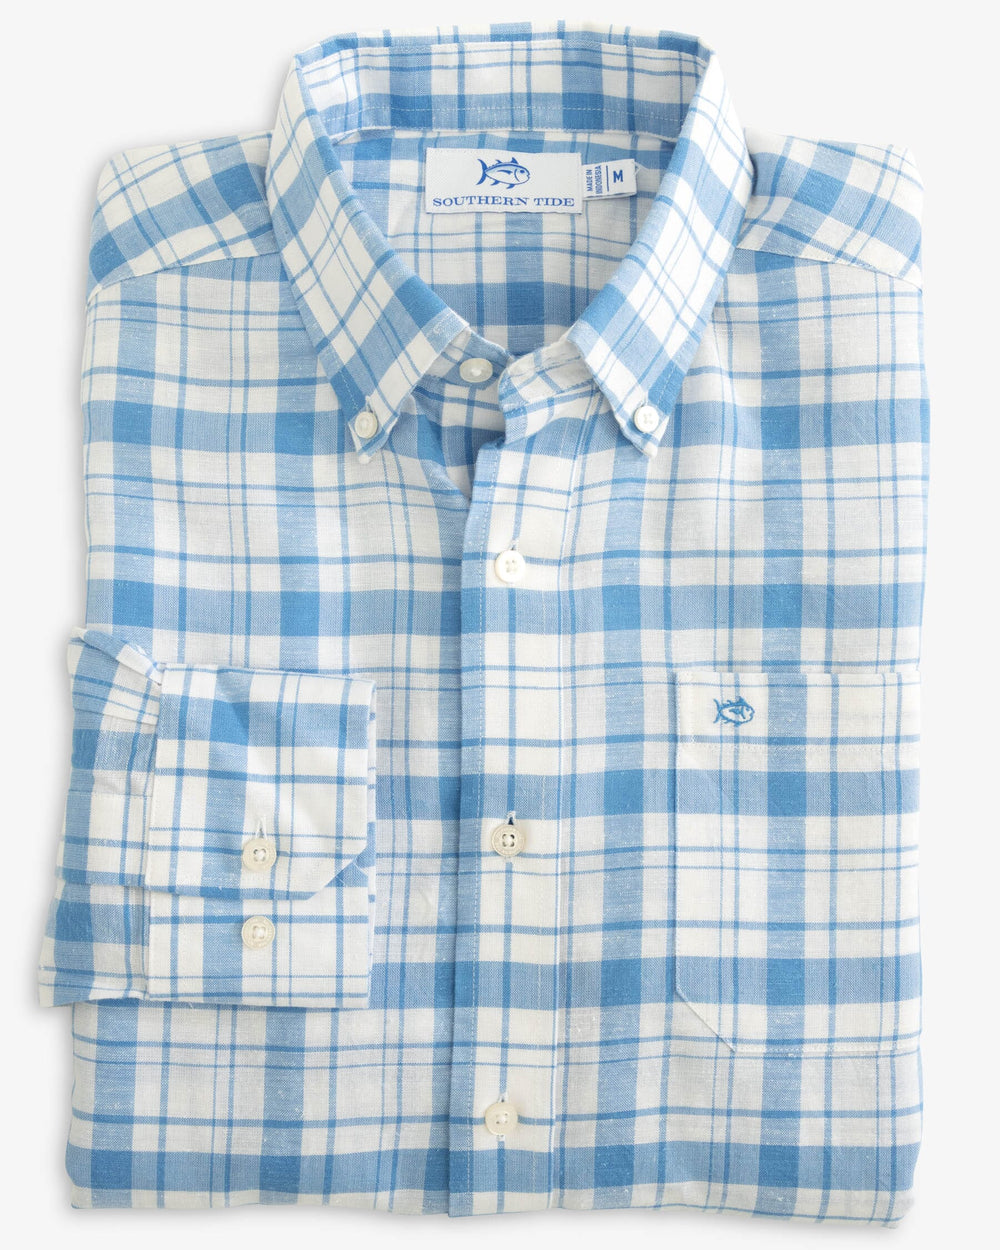 The folded view of the Southern Tide Headland Moultire Plaid Long Sleeve Sport Shirt by Southern Tide - Boat Blue